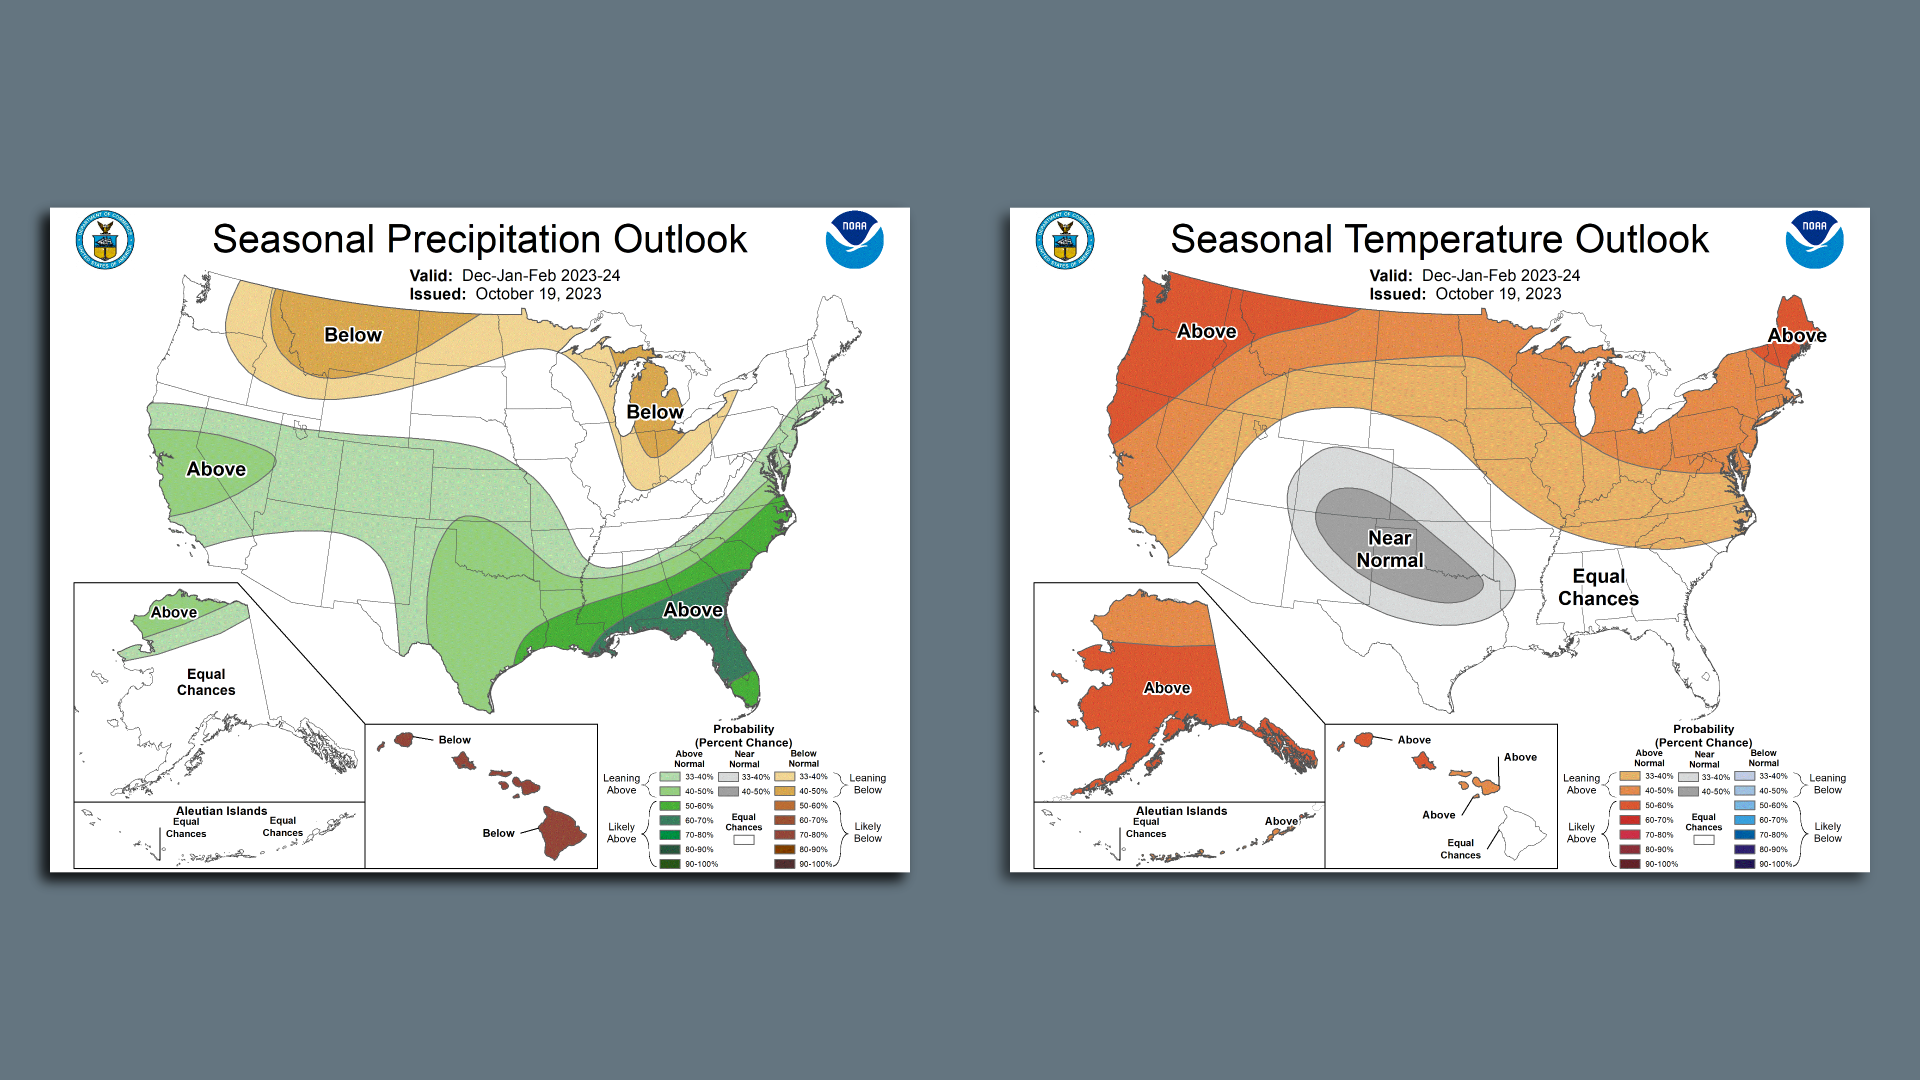 Maps showing the outlook for winter precipitation (left) and temperatures (right) as forecast by the National Weather Service.